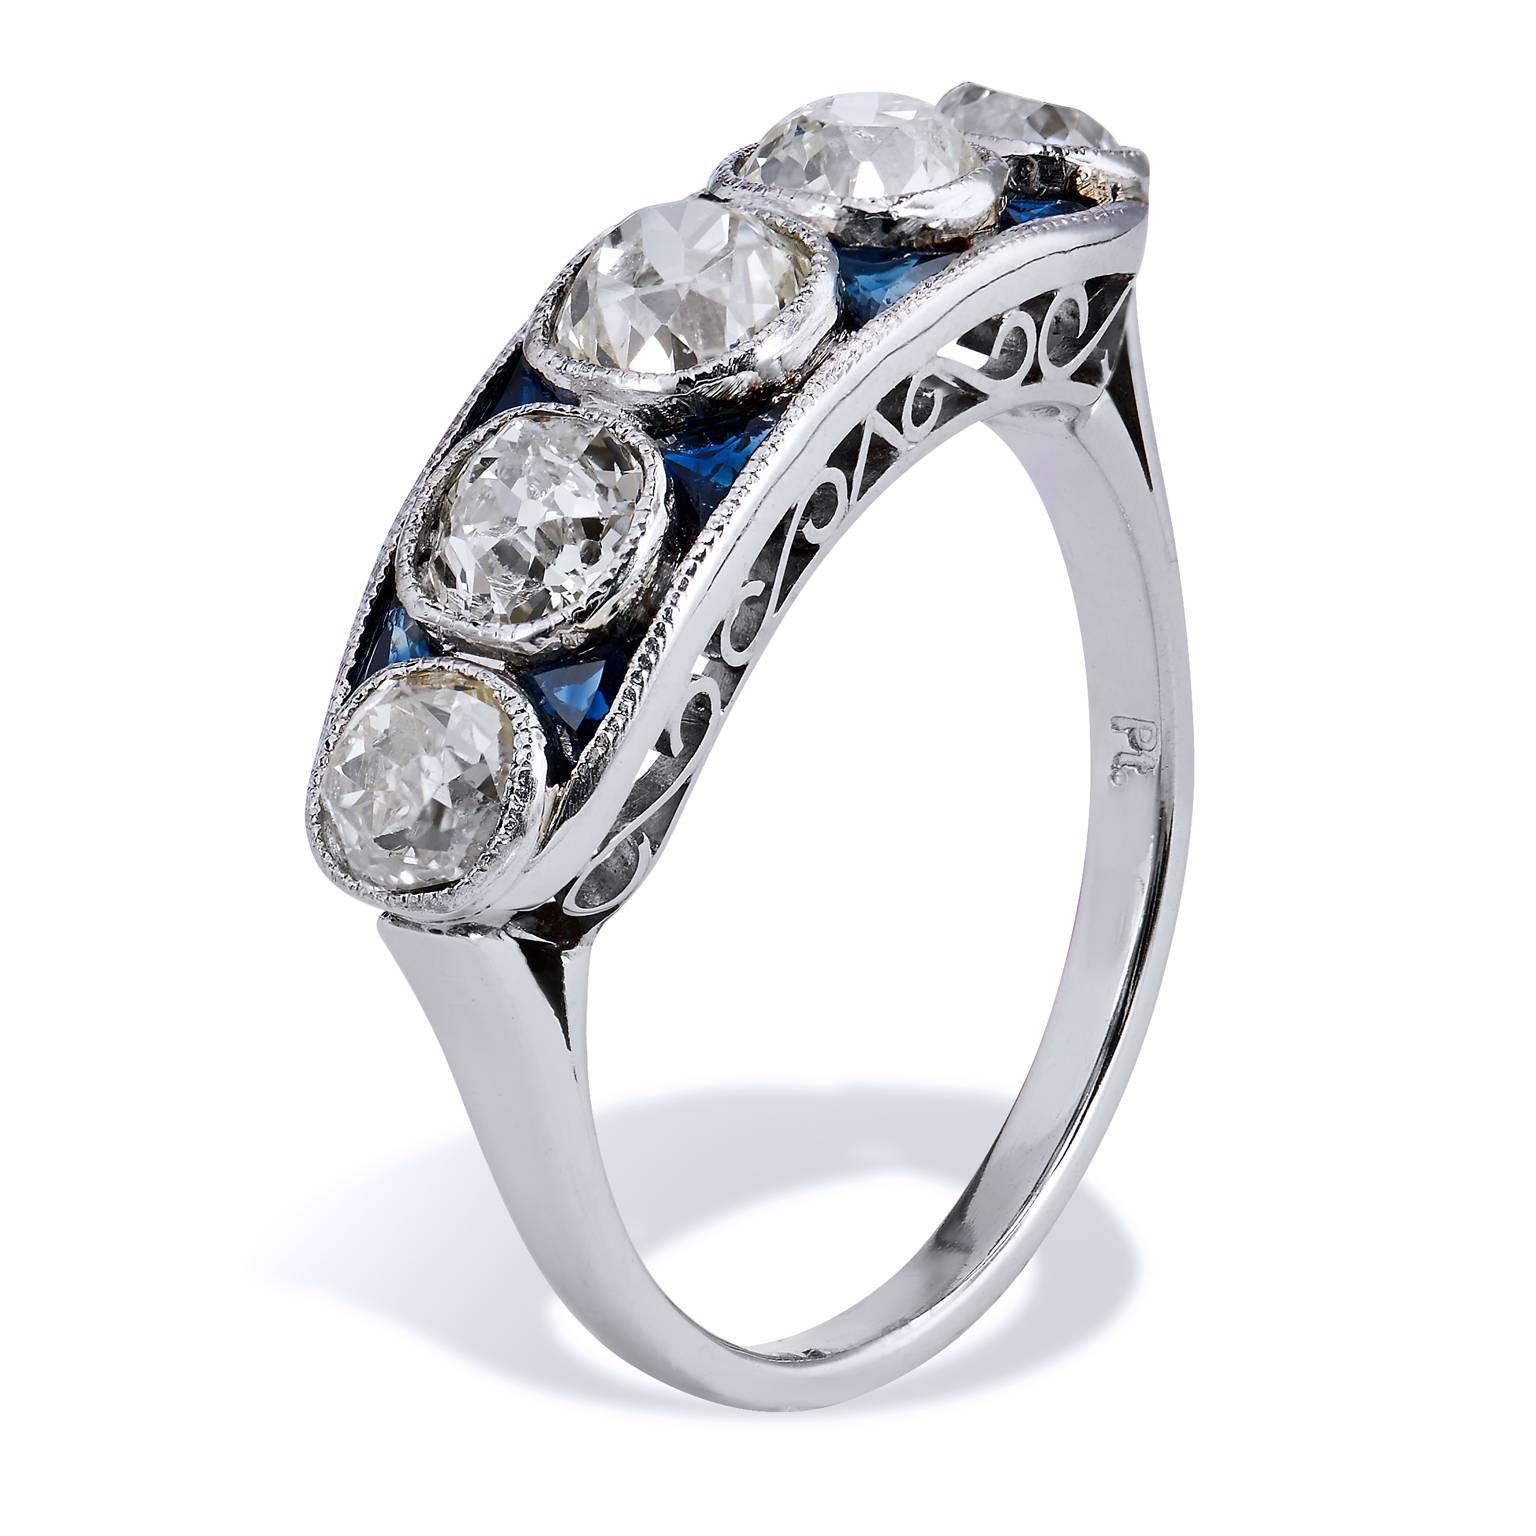 Art Deco Inspired 2.40 Carat Old Mine Cut Diamond Sapphire Platinum Band Ring

This Art Deco inspired platinum diamond band ring features five pieces of old mine cut diamonds, bezel set, with a total weight of 2.40 carats. Interlaced between the sea